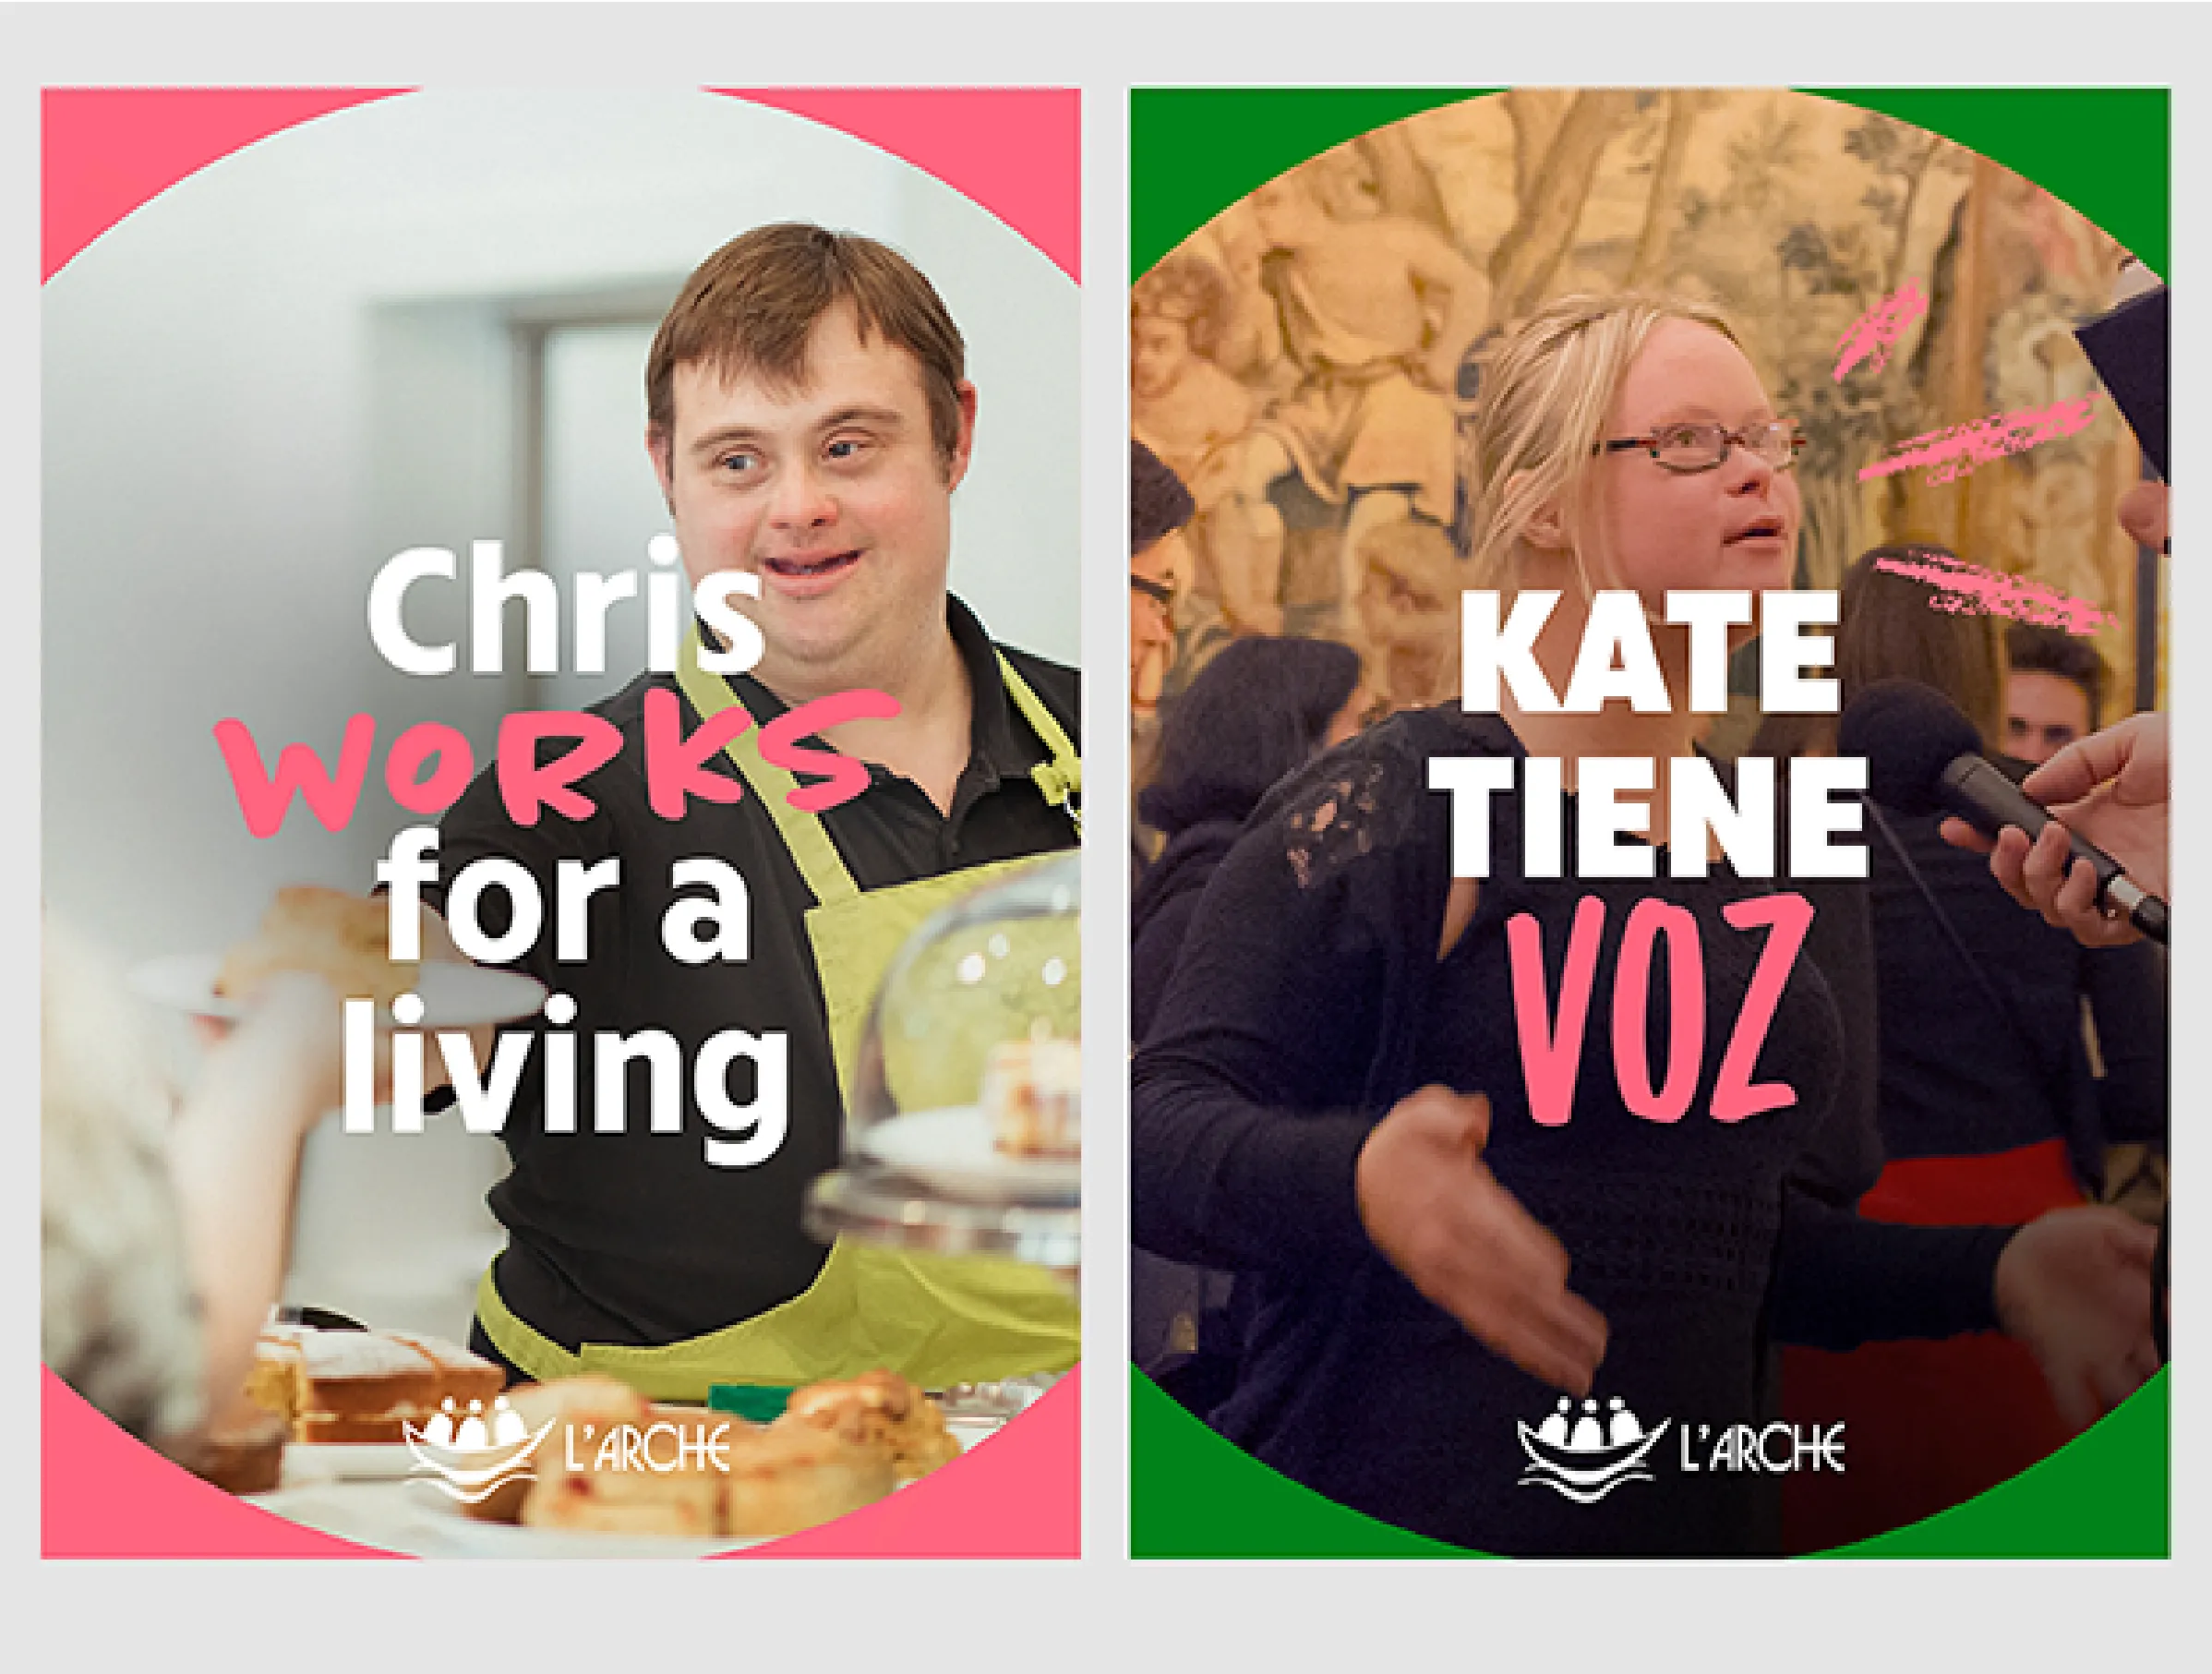 L'arche portrait posters saying 'Chris works for a living' and 'Kate tiene voz'